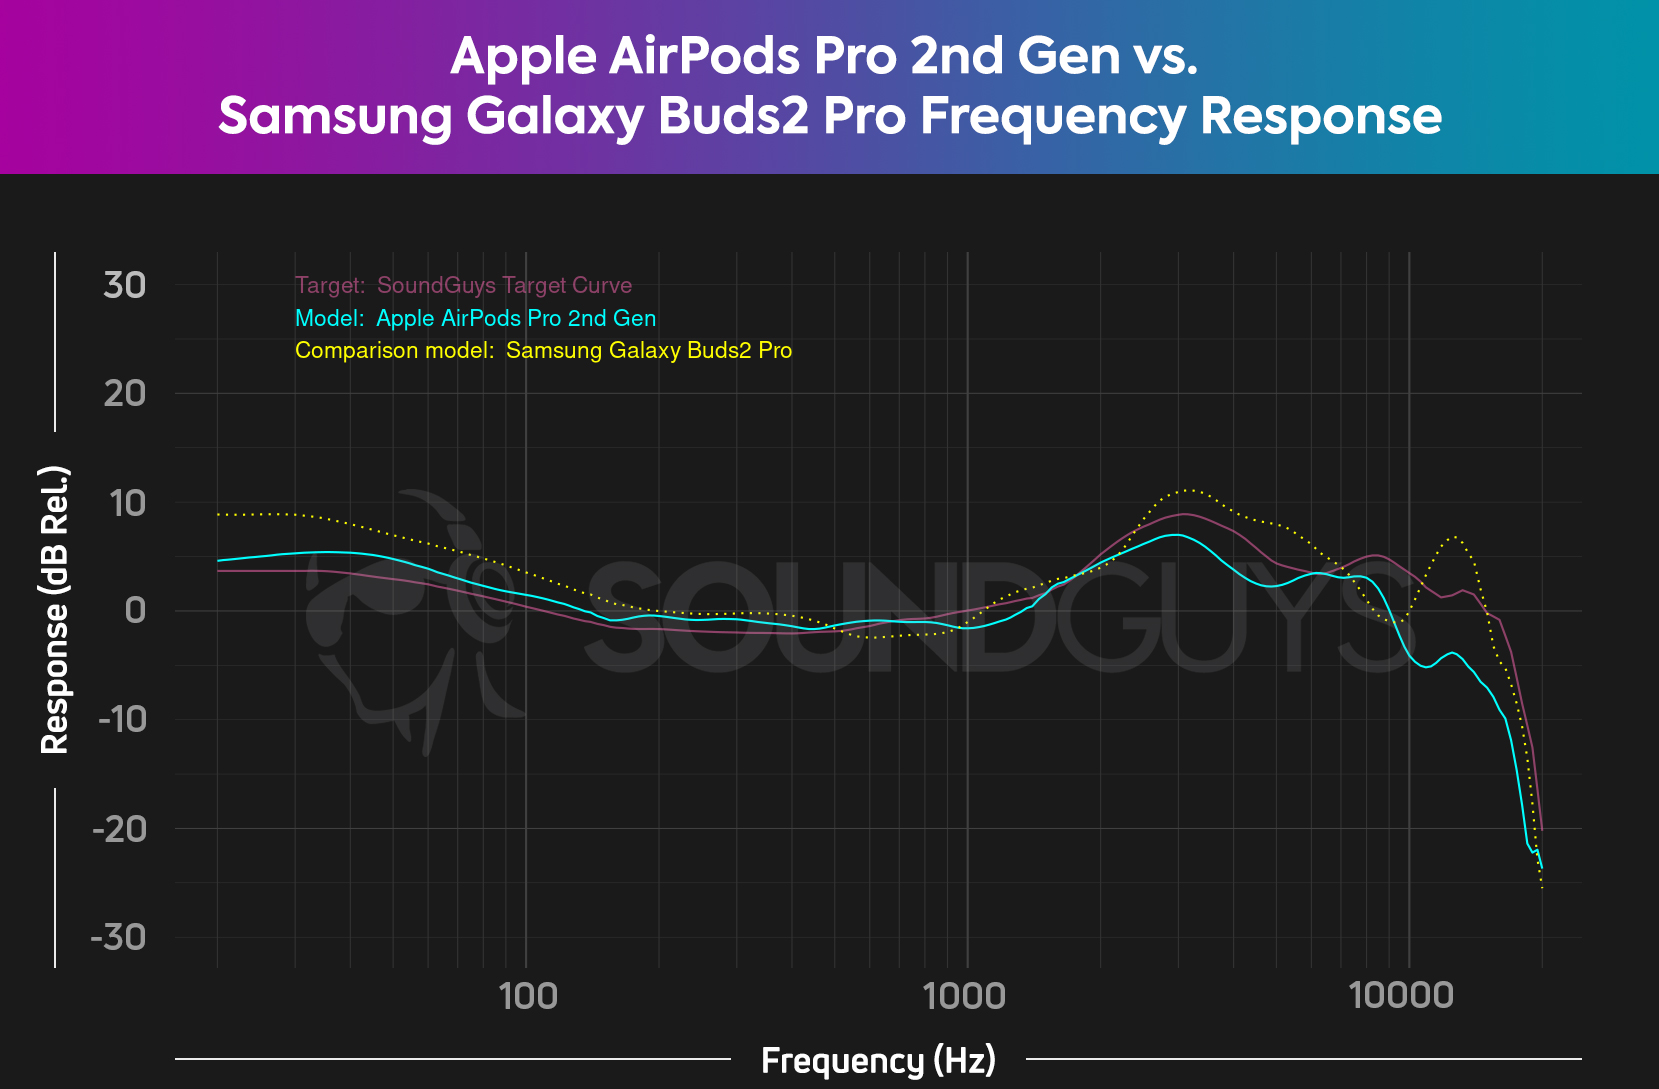 The Apple AirPods Pro 2nd Gen adhere to the SoundGuys Target Curve more closely than